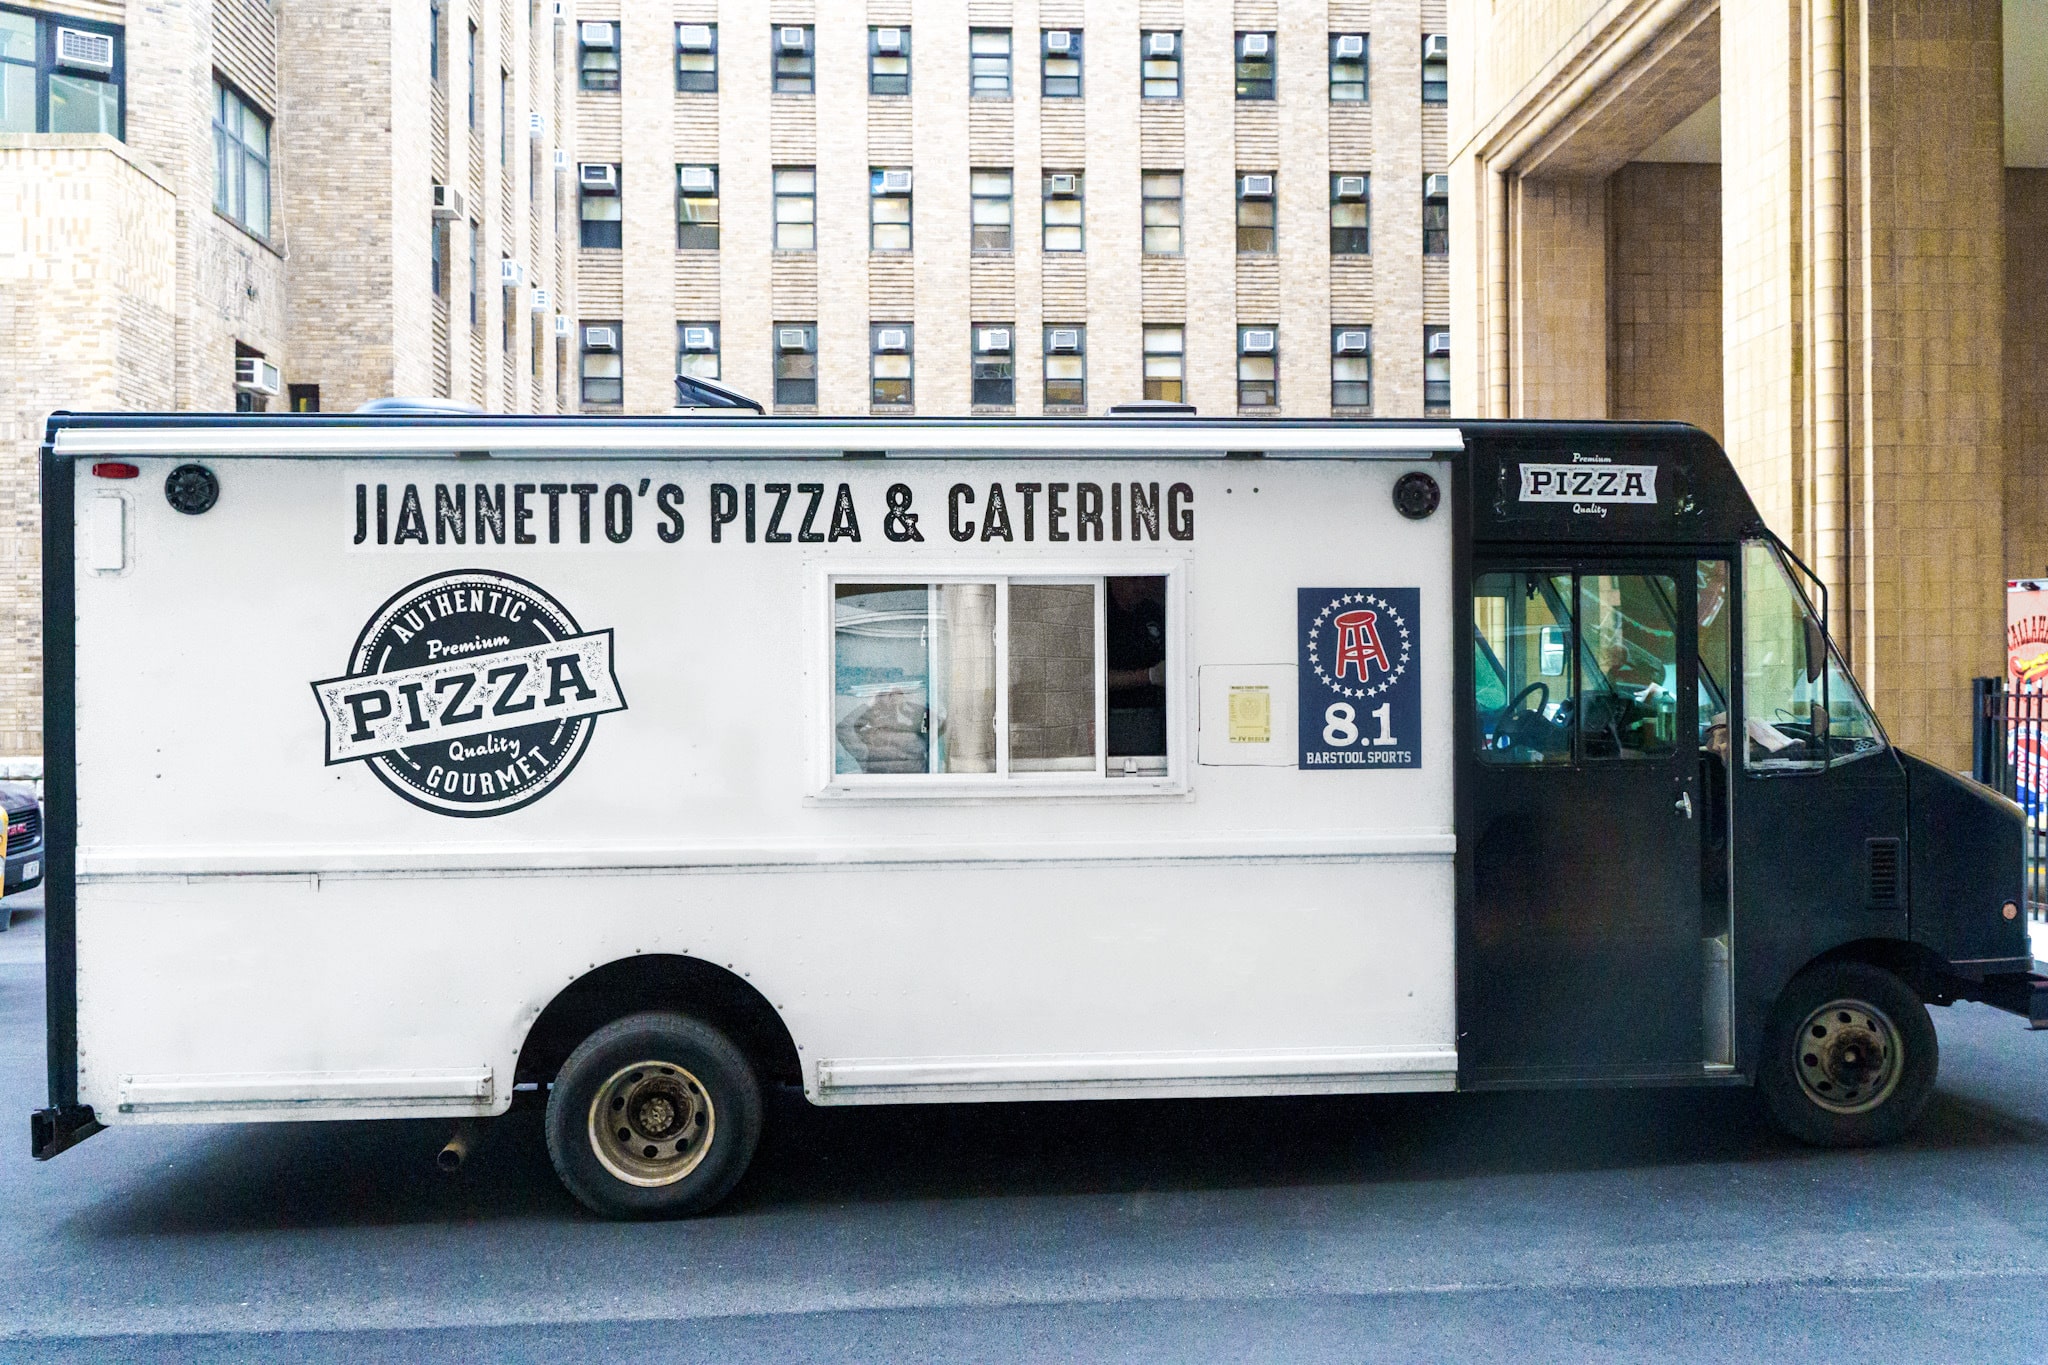 jiannetto's pizza truck with barstool rating displayed